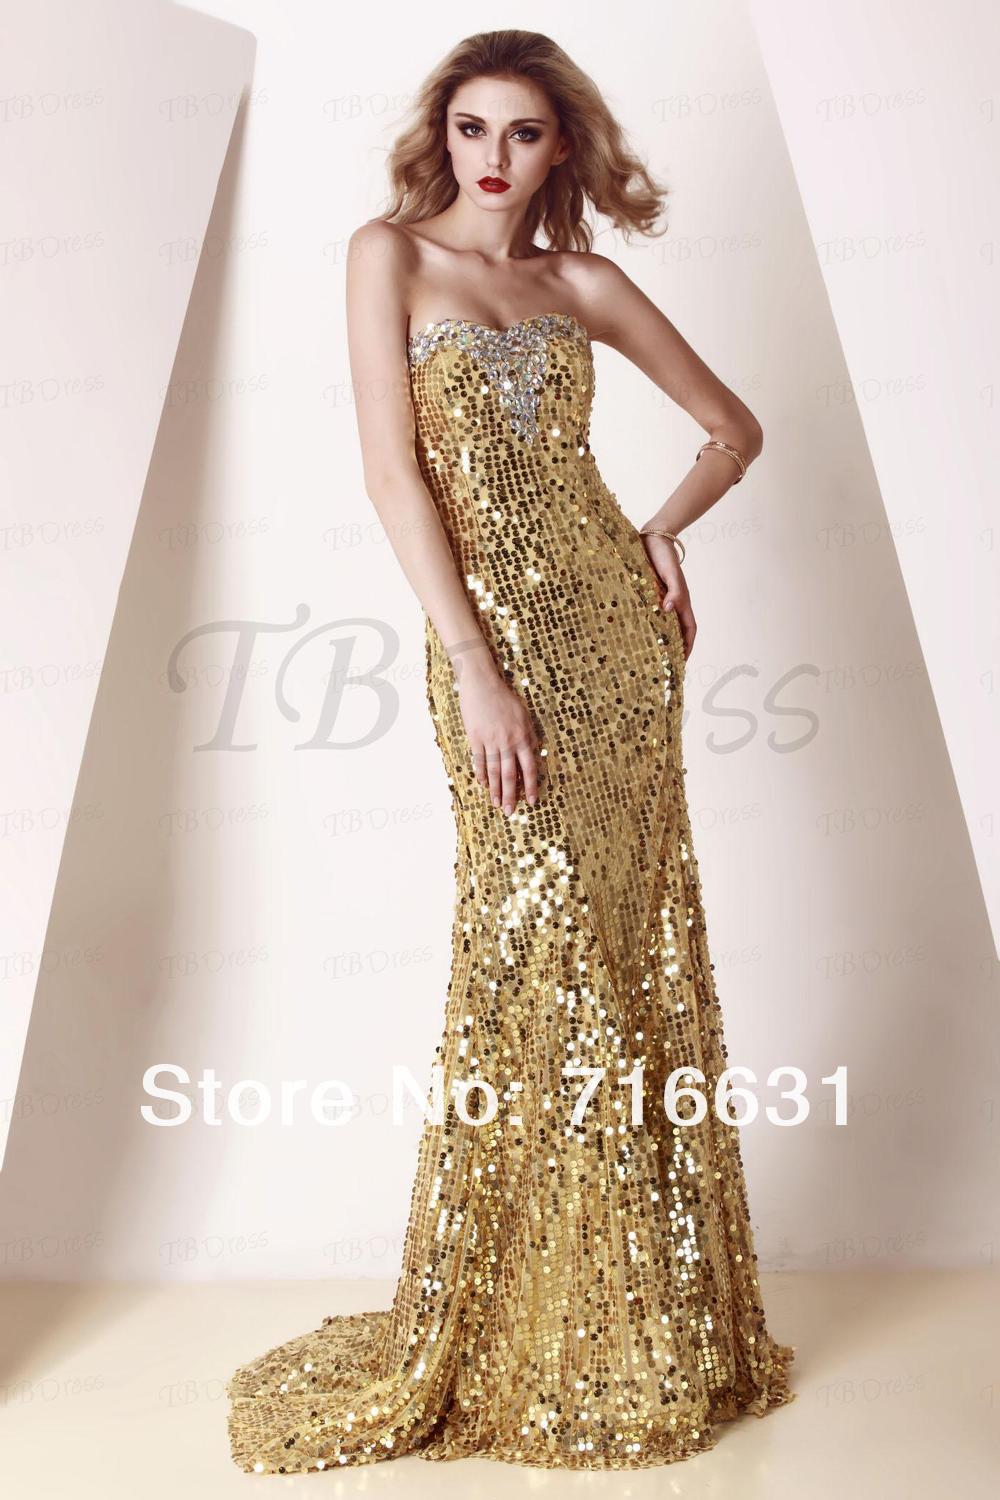 Black And Gold Metallic Dress - Make Your Evening Special